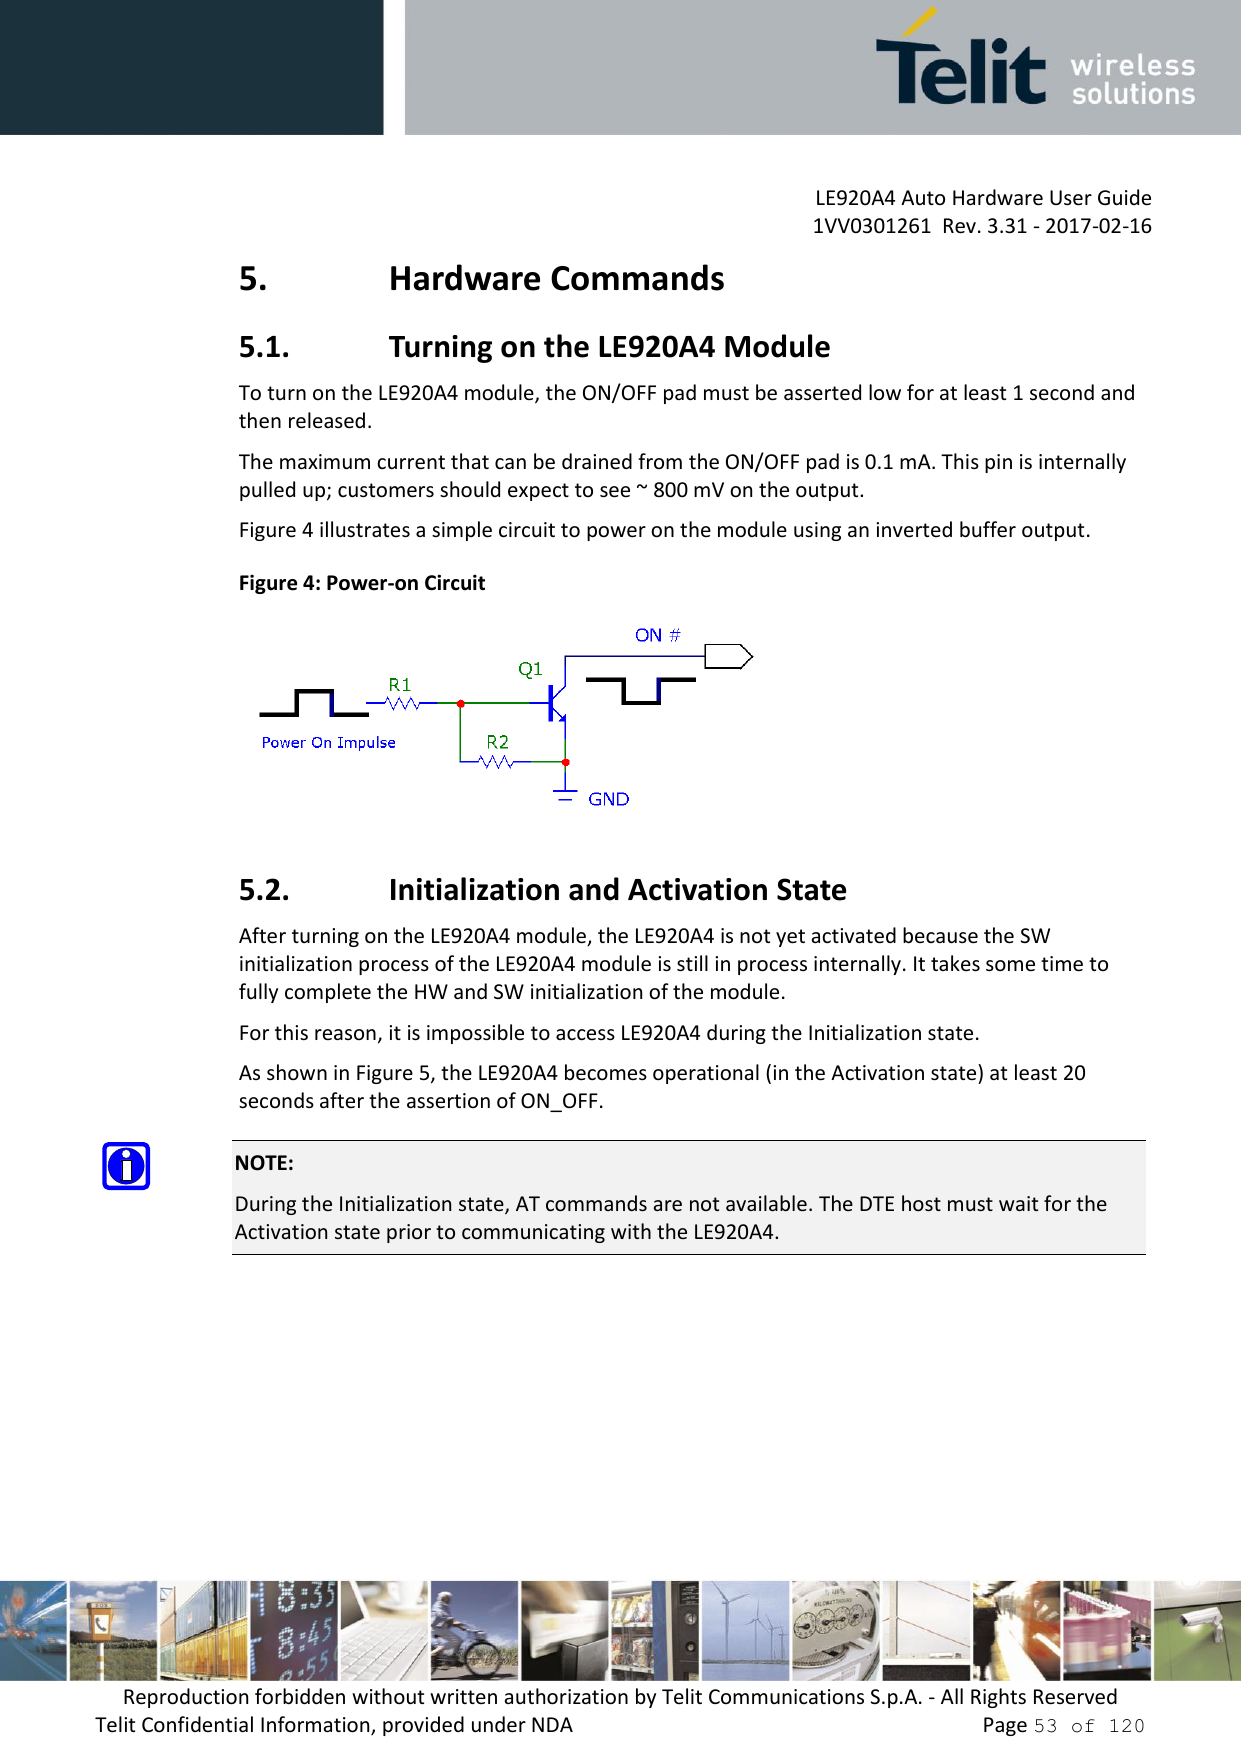         LE920A4 Auto Hardware User Guide     1VV0301261  Rev. 3.31 - 2017-02-16 Reproduction forbidden without written authorization by Telit Communications S.p.A. - All Rights Reserved Telit Confidential Information, provided under NDA                 Page 53 of 120 5. Hardware Commands 5.1. Turning on the LE920A4 Module To turn on the LE920A4 module, the ON/OFF pad must be asserted low for at least 1 second and then released. The maximum current that can be drained from the ON/OFF pad is 0.1 mA. This pin is internally pulled up; customers should expect to see ~ 800 mV on the output. Figure 4 illustrates a simple circuit to power on the module using an inverted buffer output. Figure 4: Power-on Circuit  5.2. Initialization and Activation State After turning on the LE920A4 module, the LE920A4 is not yet activated because the SW initialization process of the LE920A4 module is still in process internally. It takes some time to fully complete the HW and SW initialization of the module. For this reason, it is impossible to access LE920A4 during the Initialization state. As shown in Figure 5, the LE920A4 becomes operational (in the Activation state) at least 20 seconds after the assertion of ON_OFF.  NOTE: During the Initialization state, AT commands are not available. The DTE host must wait for the Activation state prior to communicating with the LE920A4.  